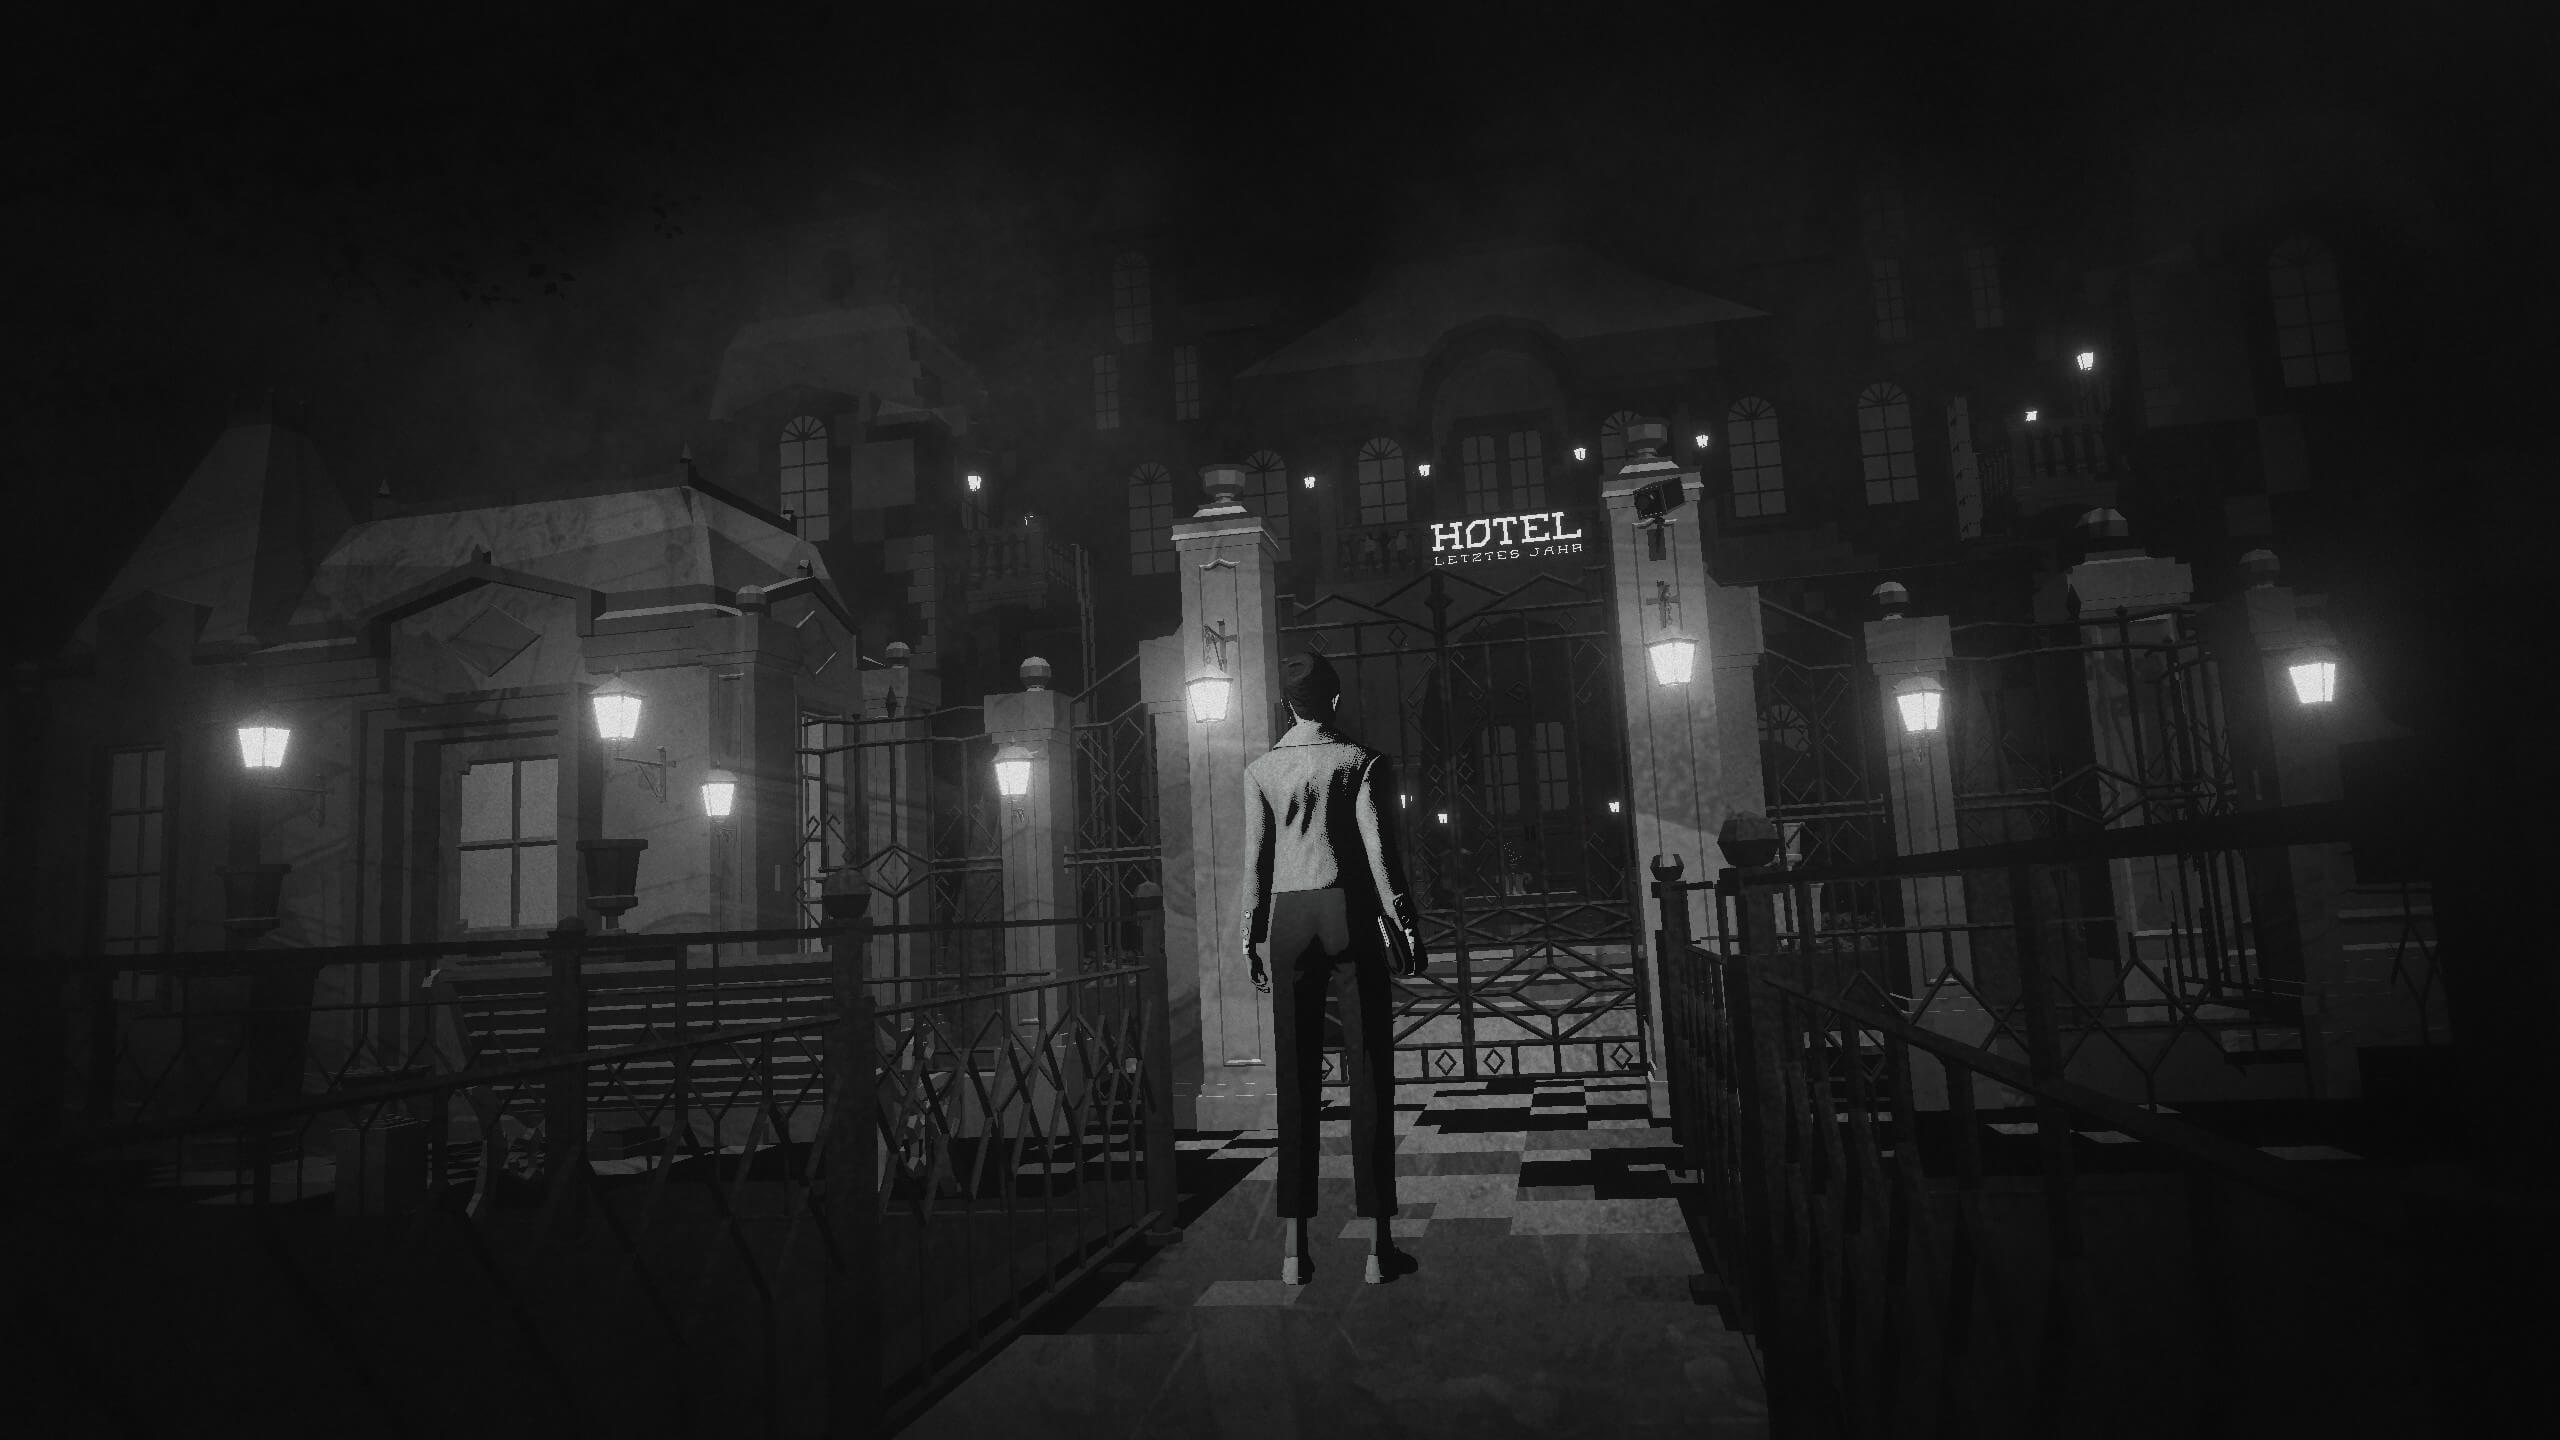 The player character stands before a grand hotel building, Hotel Letztes Jahr.